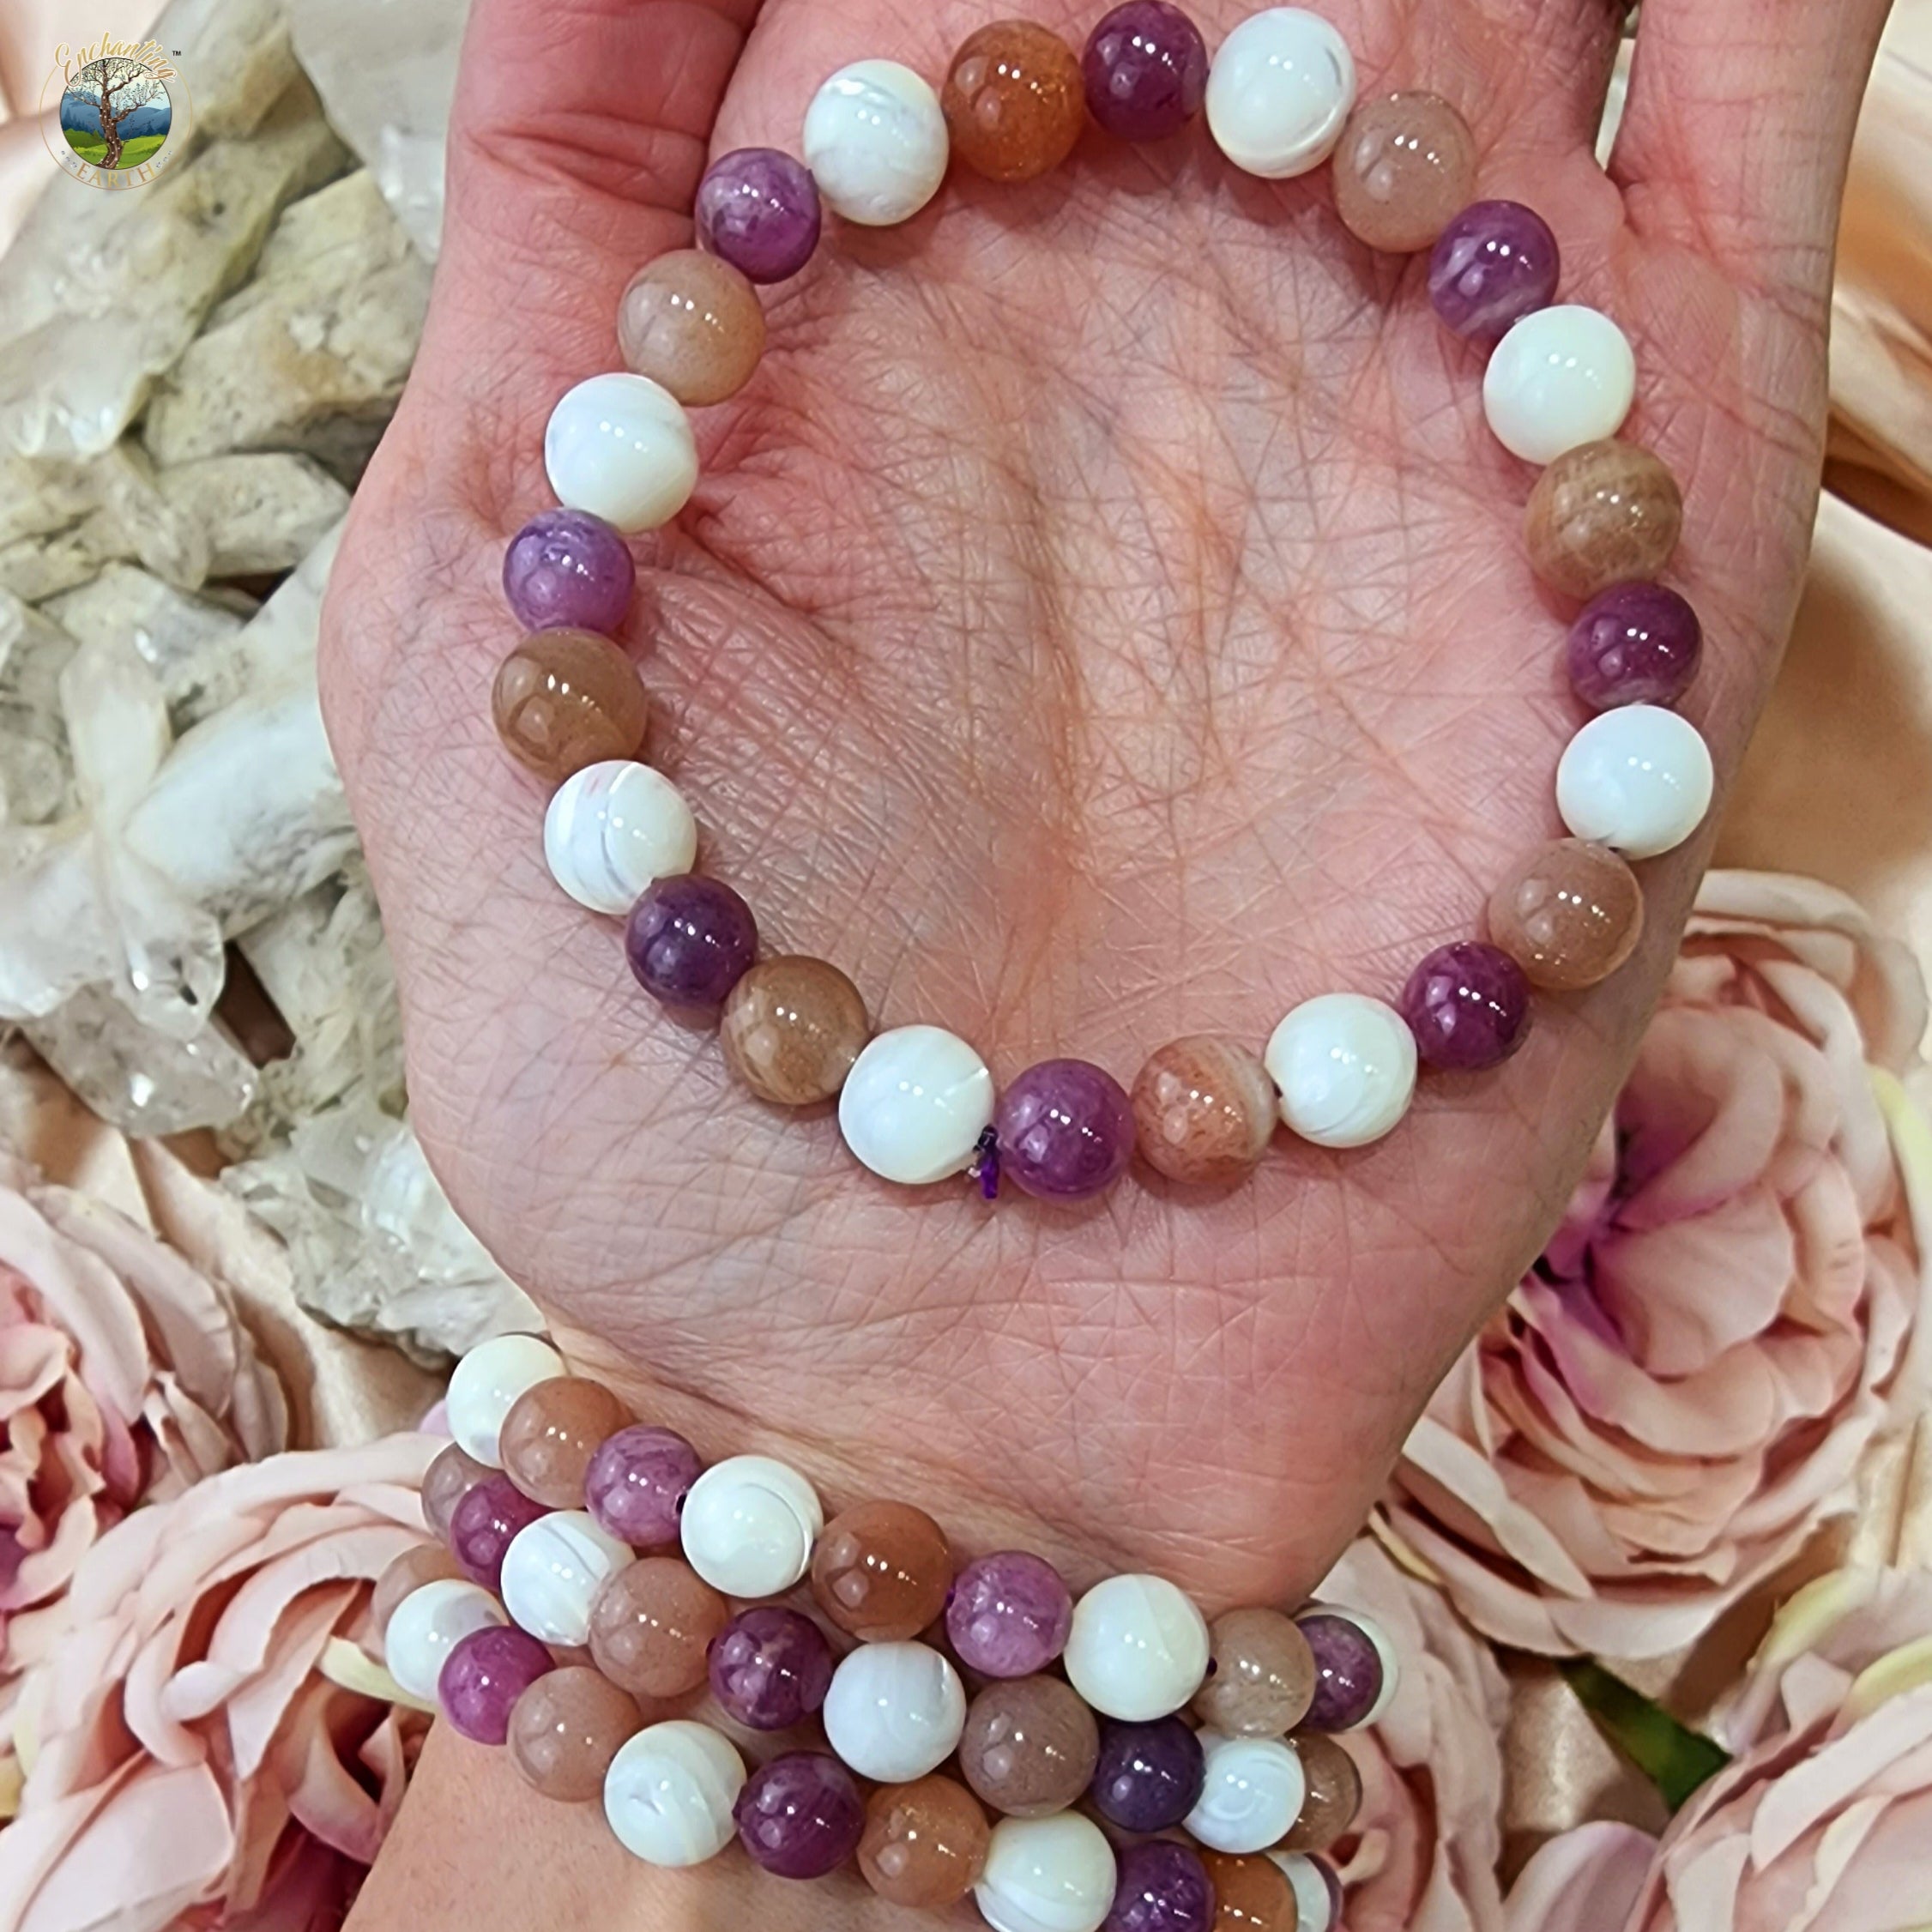 Cancer Bracelet (Moonstone, Mother of Pearl and Ruby) *High Quality* for Empowerment and Strength